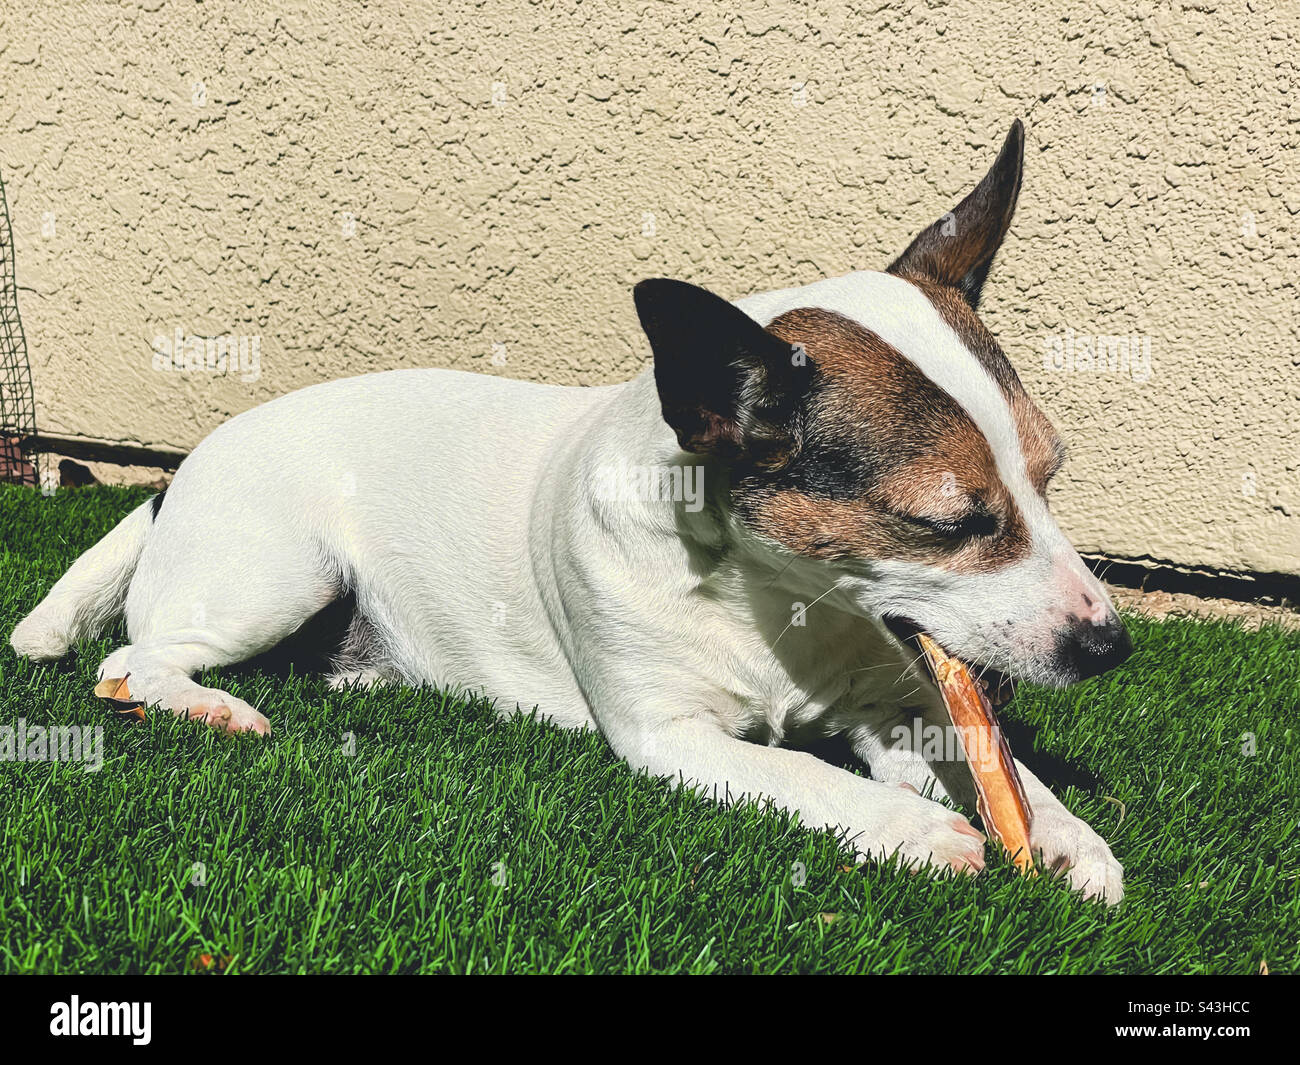 Low angle view of a small dog chewing on a bully stick outdoors. Stock Photo